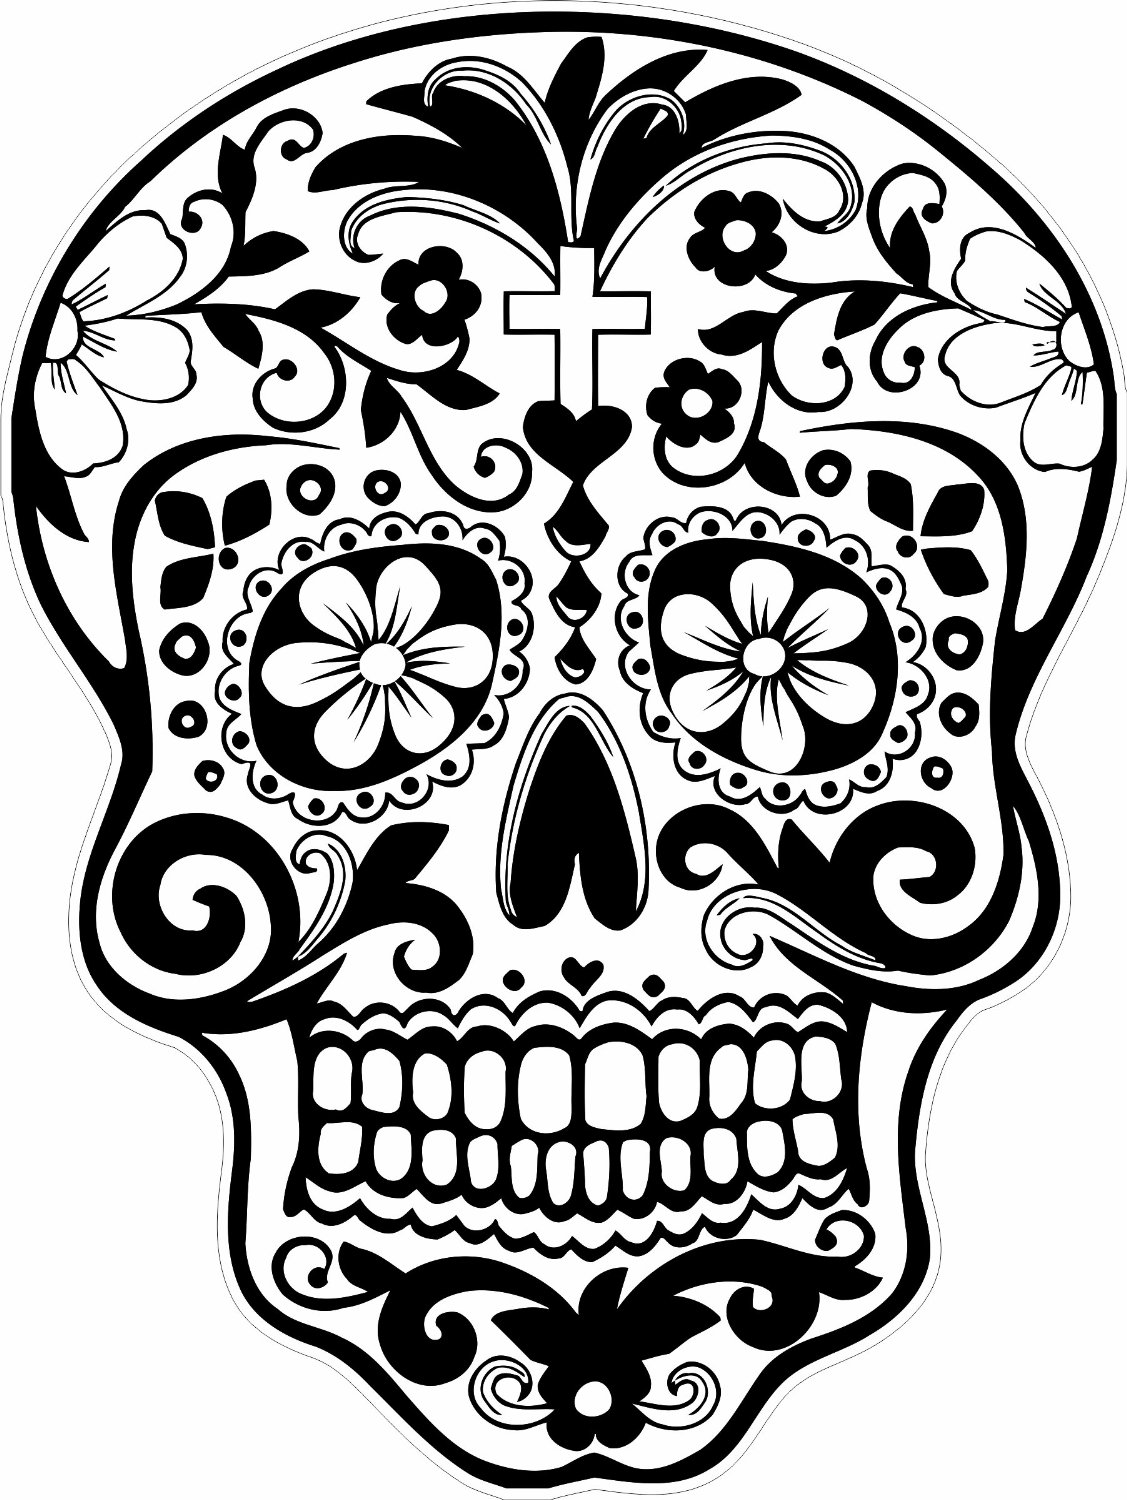 day-of-the-dead-diy-pdf-printables-templates-crafts-recipes